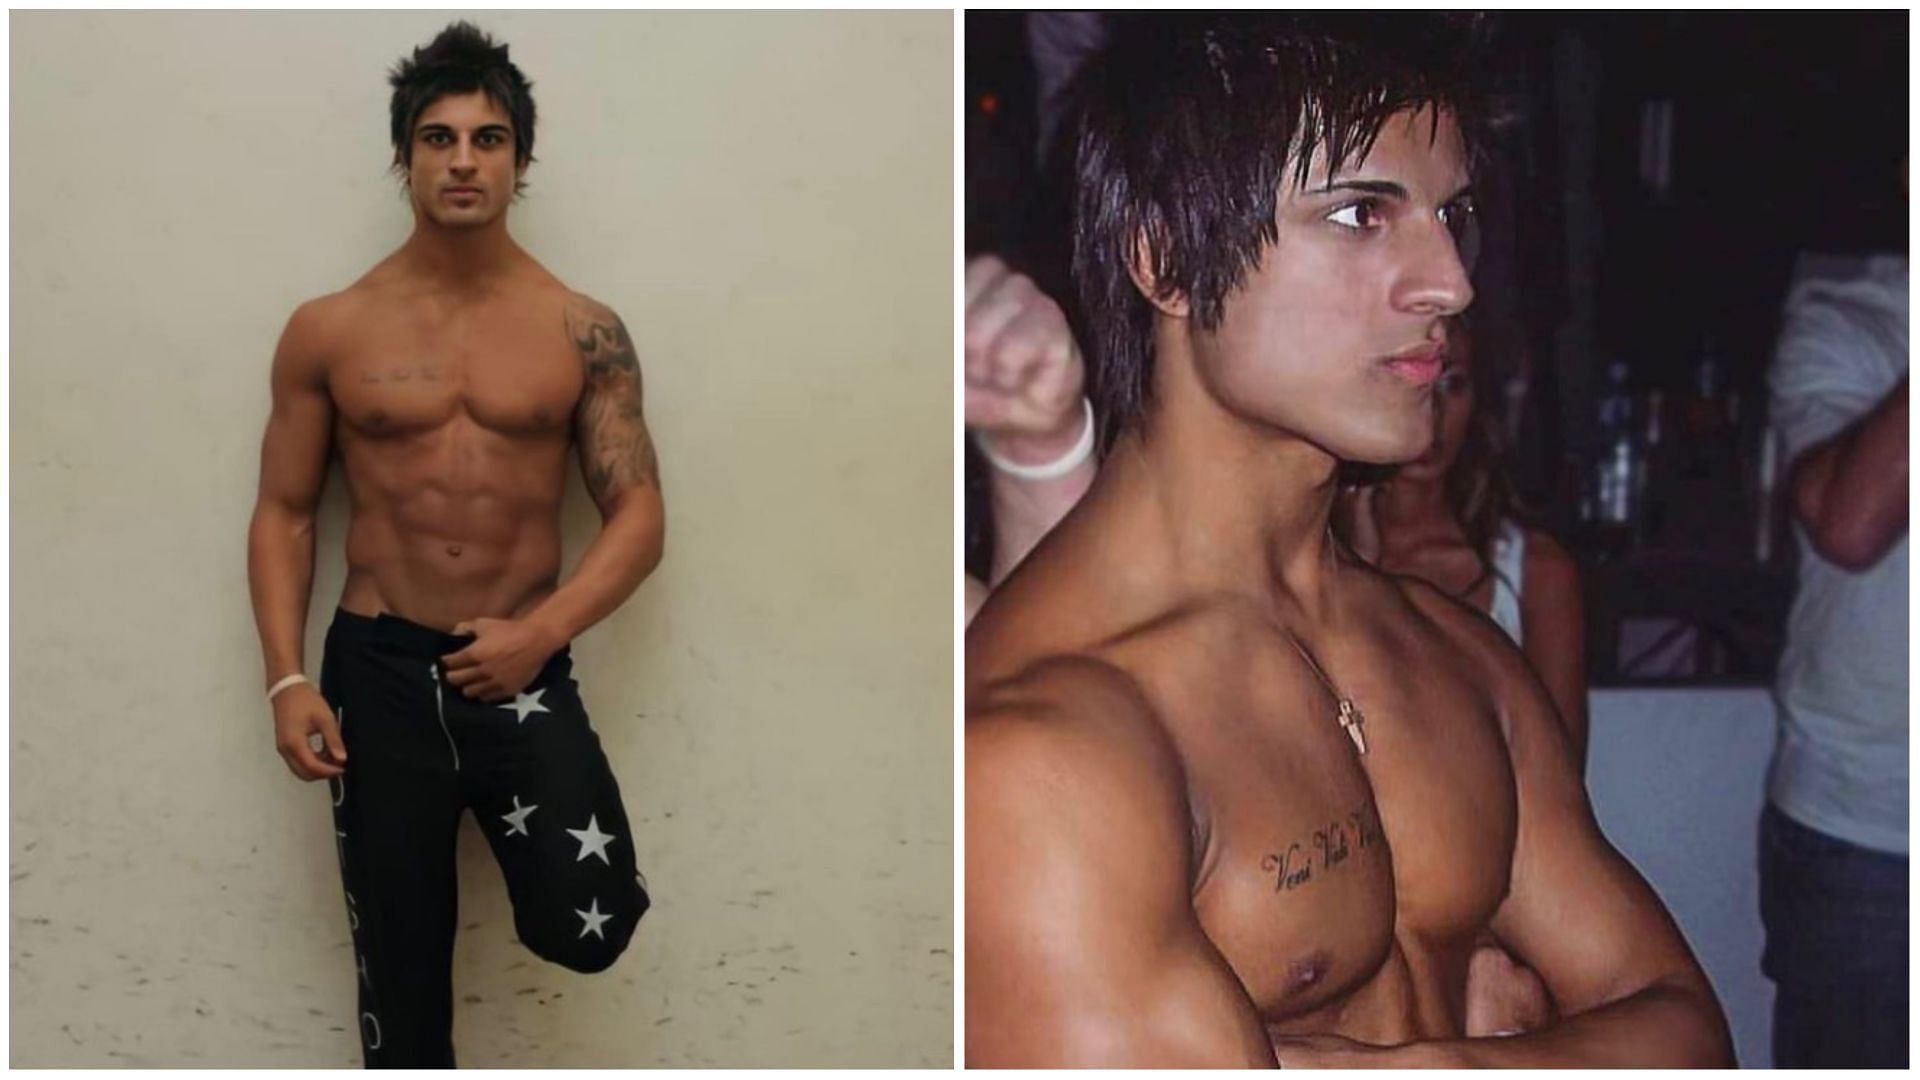 How Old Was Zyzz When He Died?